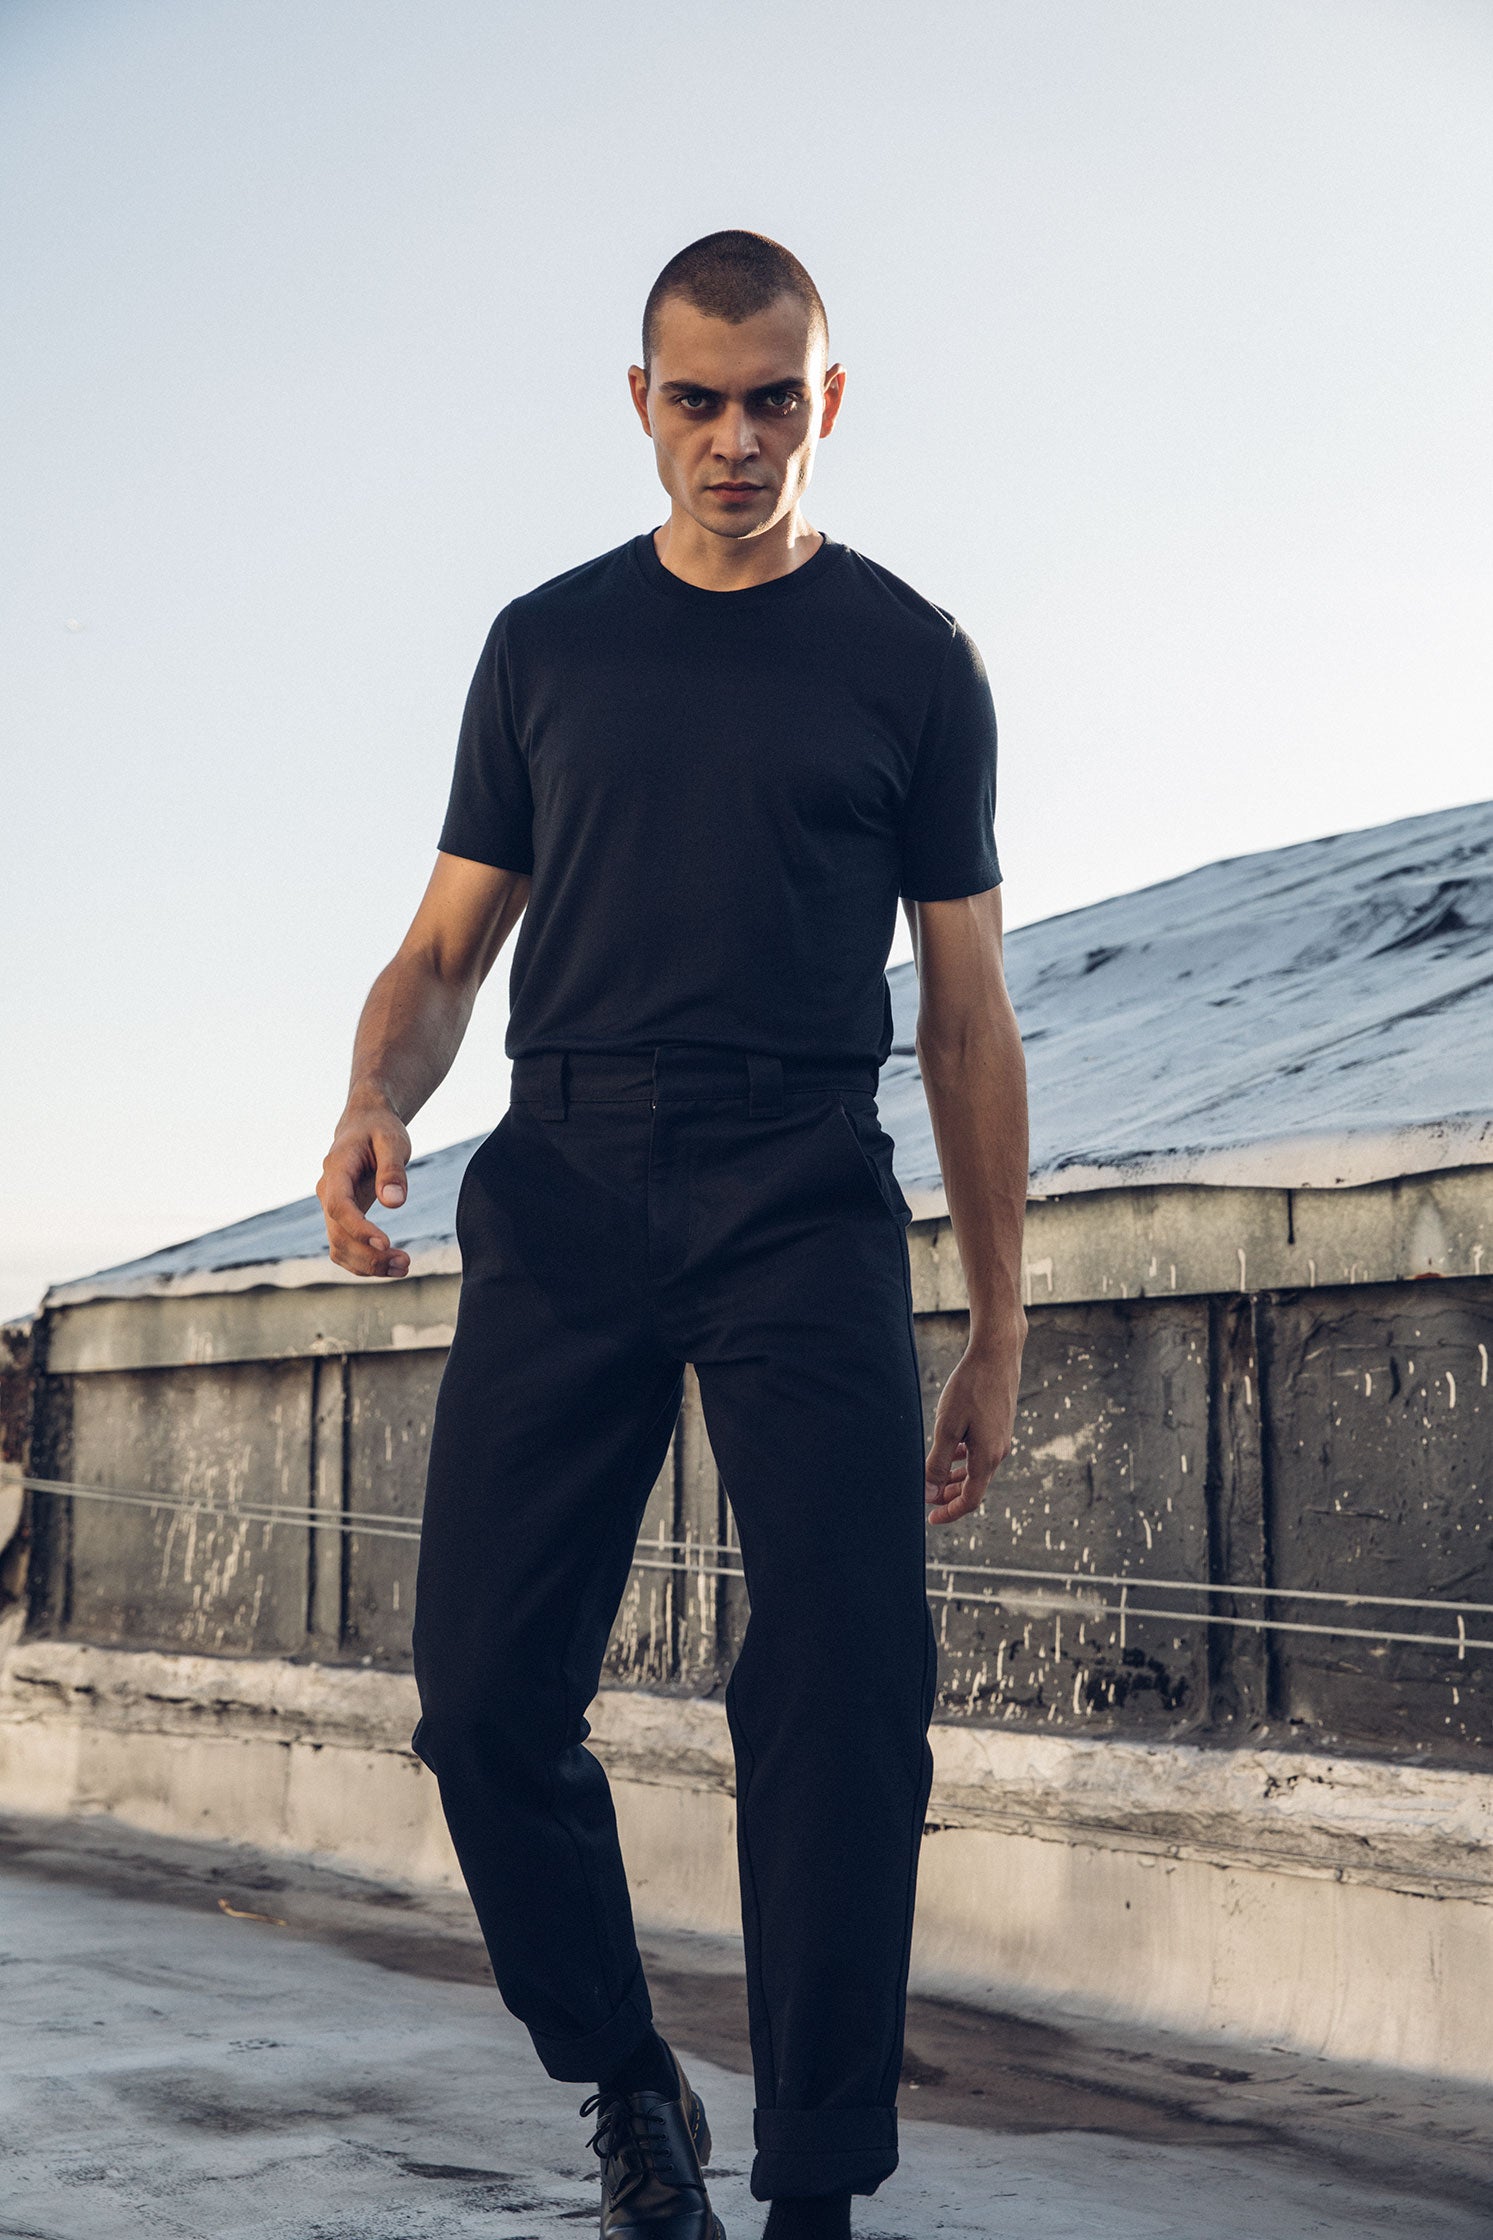 Kirill in the Washed Black Duckworks and a tucked in Black Ultrafine Merino Cut One T-Shirt, front view on a rooftop